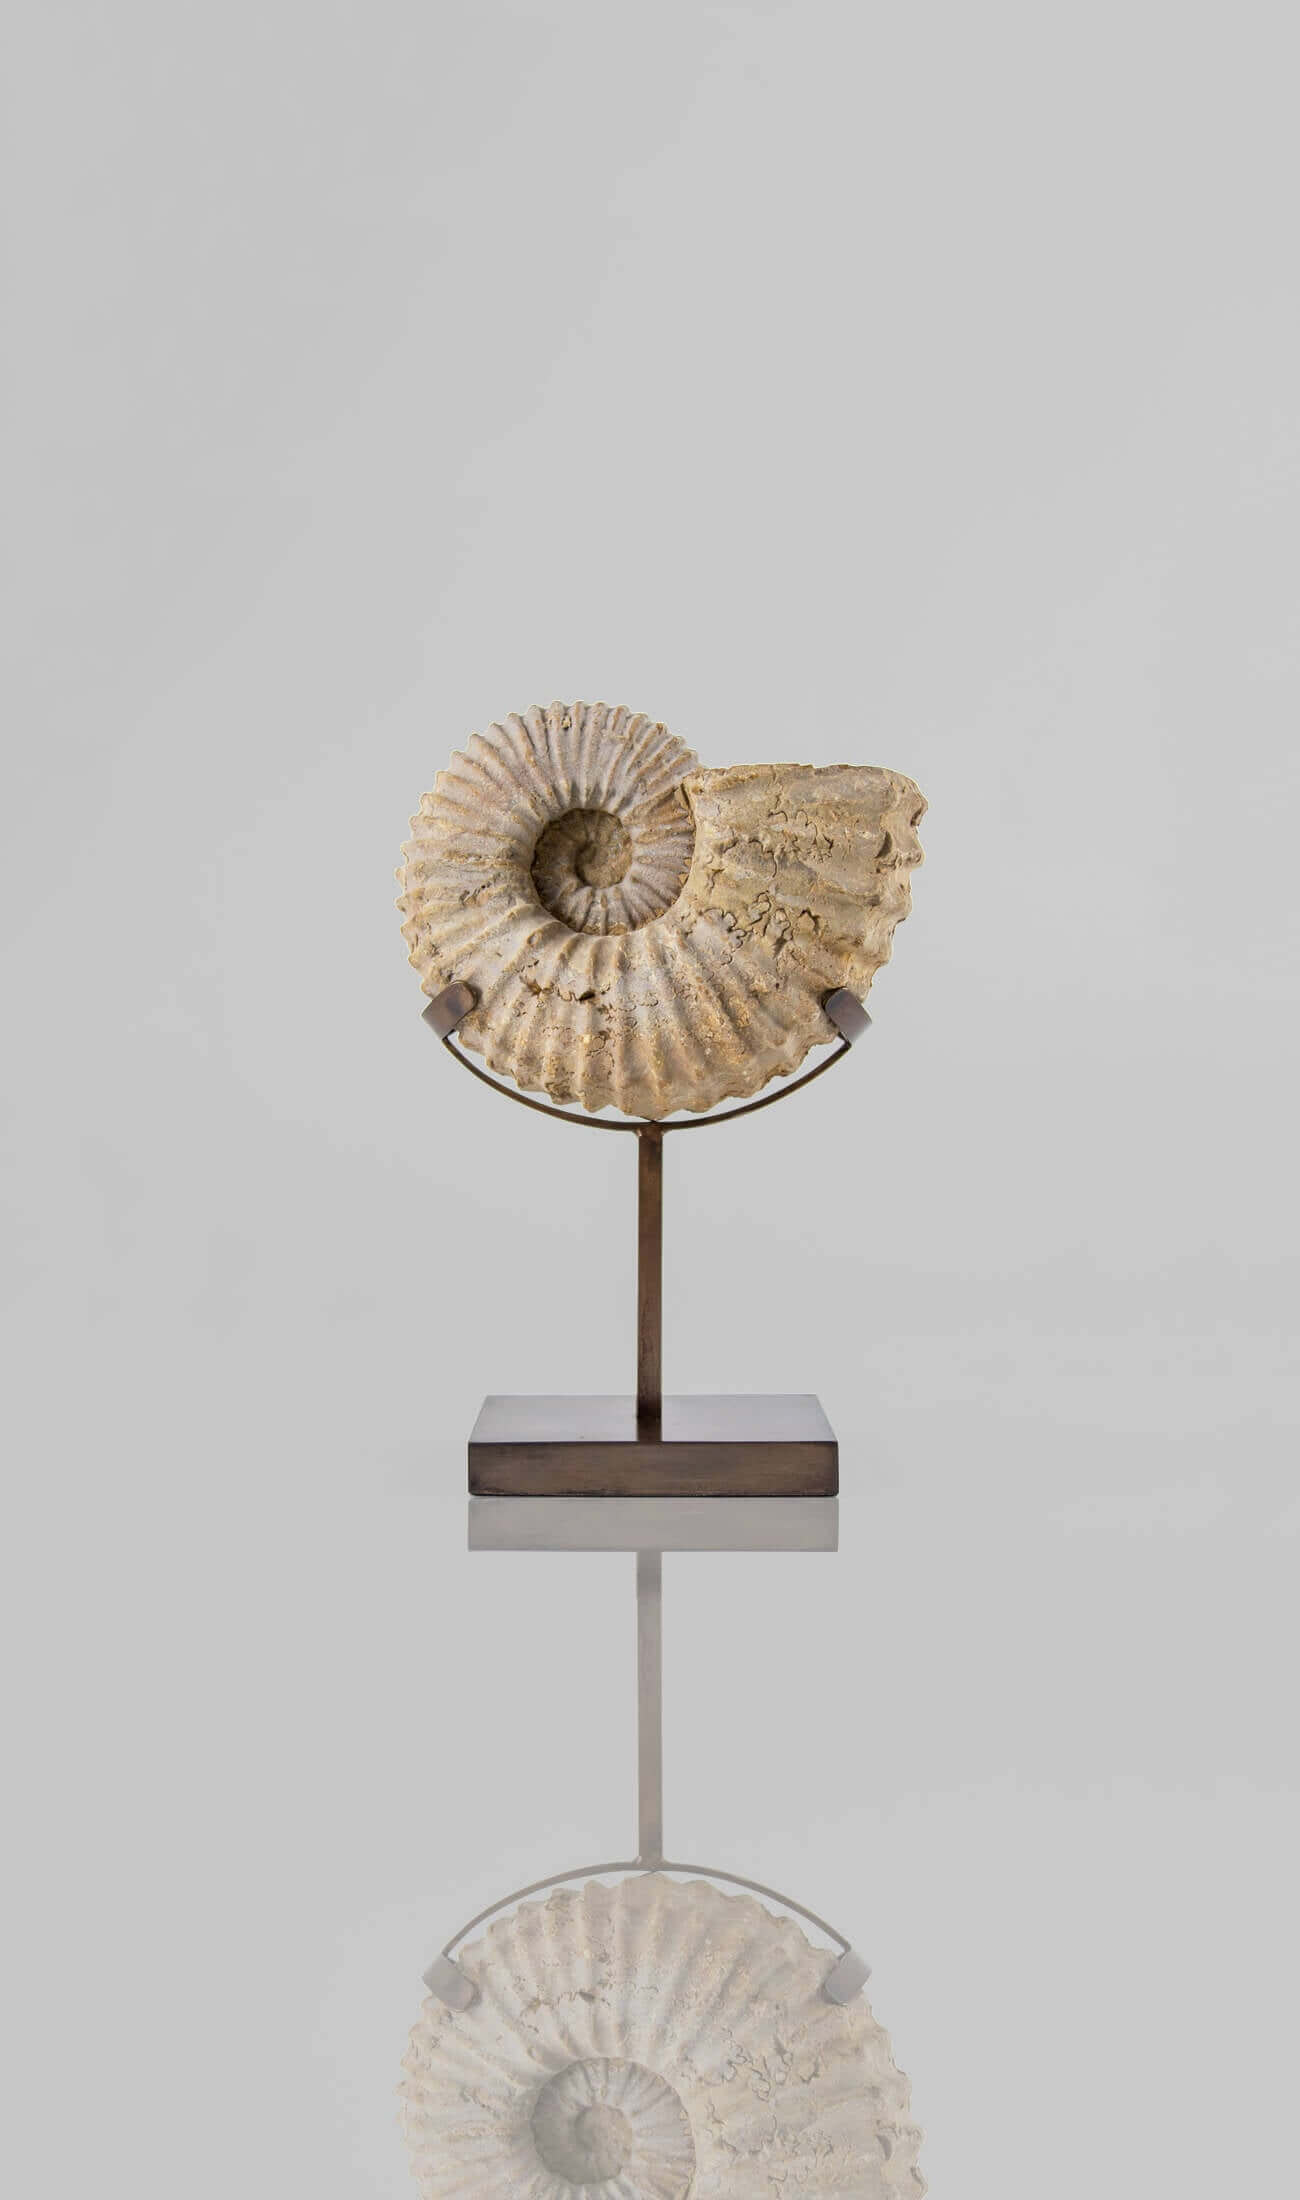 A wonderful Calycoceras asiaticum ammonite measuring 205mm transformed on AES bronze stand at THE FOSSIL STORE